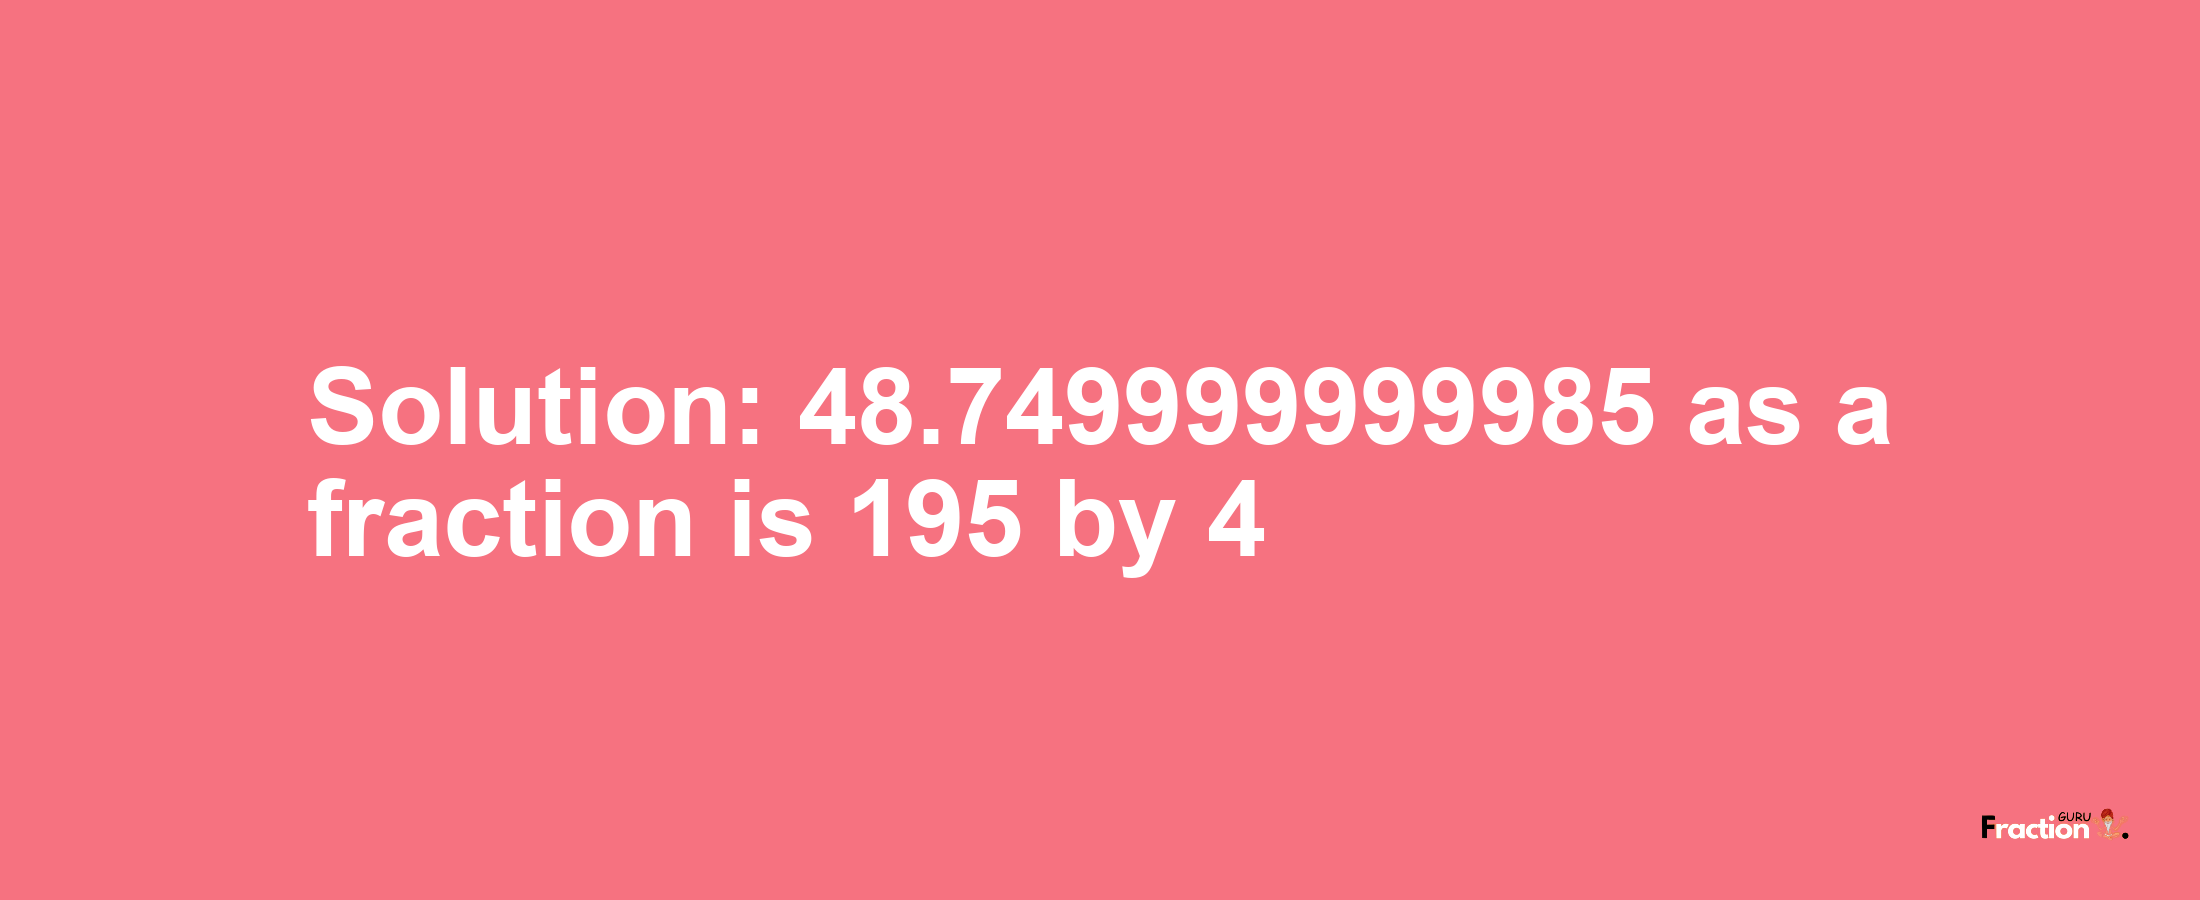 Solution:48.749999999985 as a fraction is 195/4